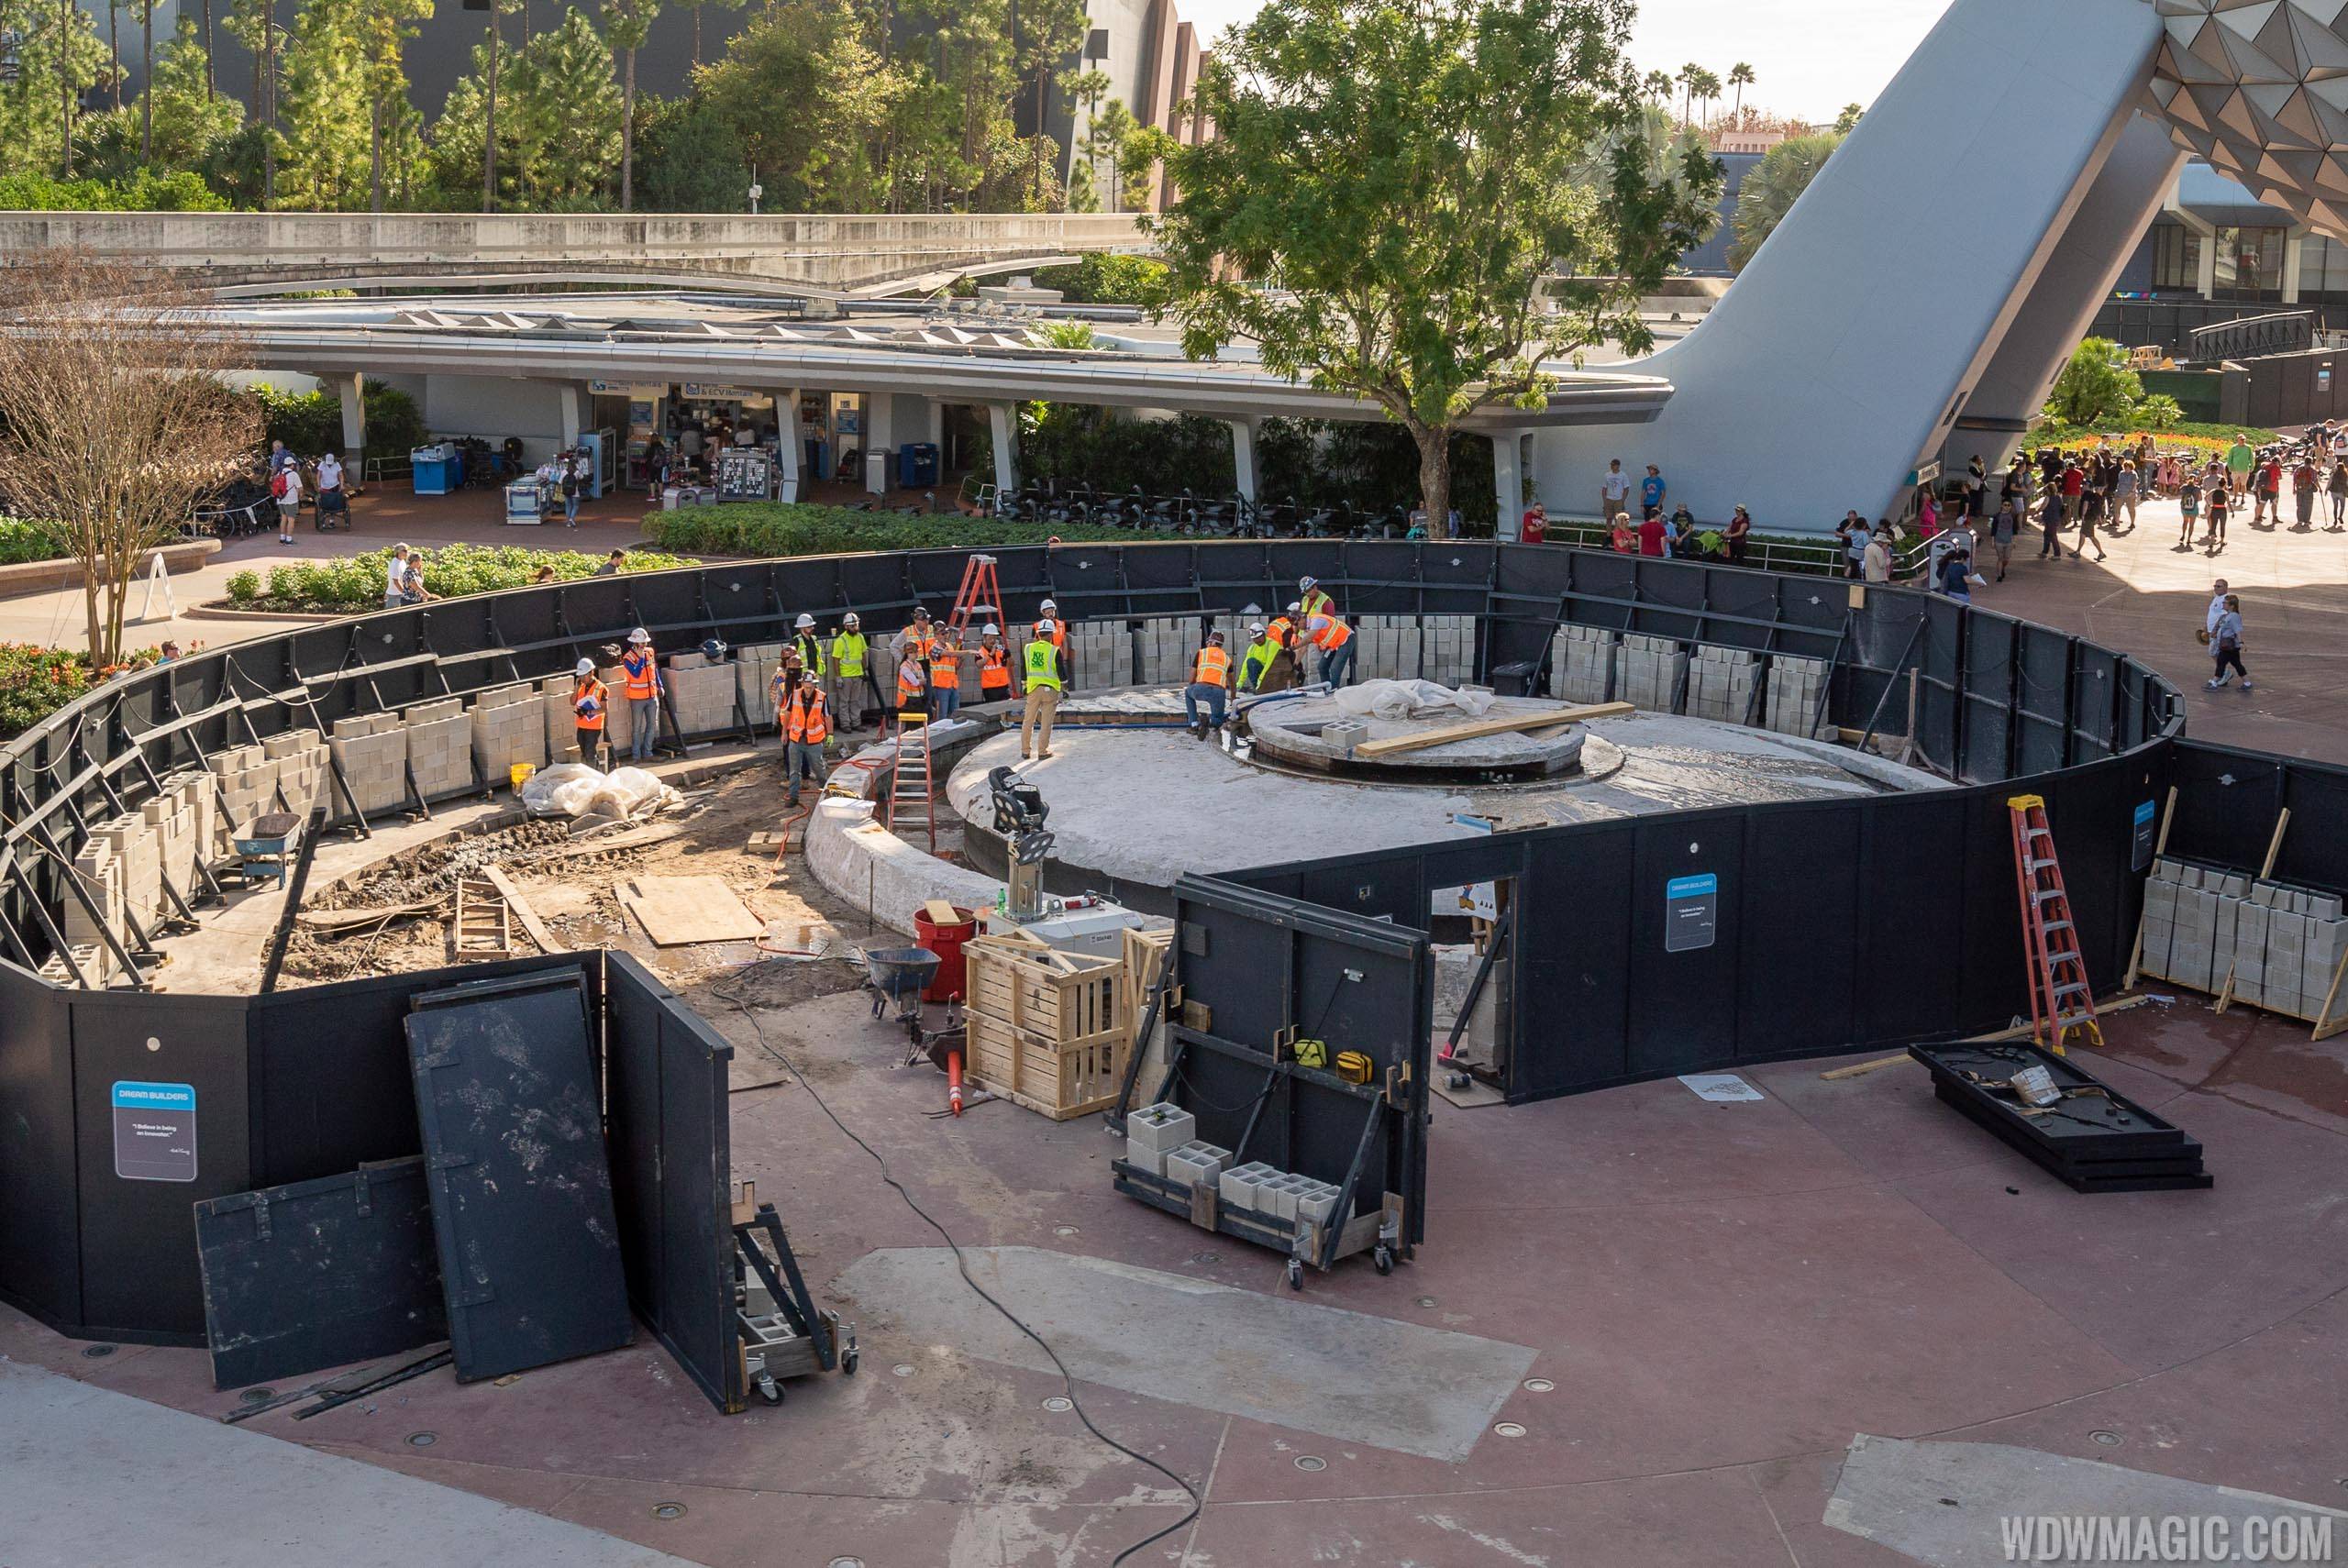 PHOTOS - Imagineers test Epcot's new main entrance water feature